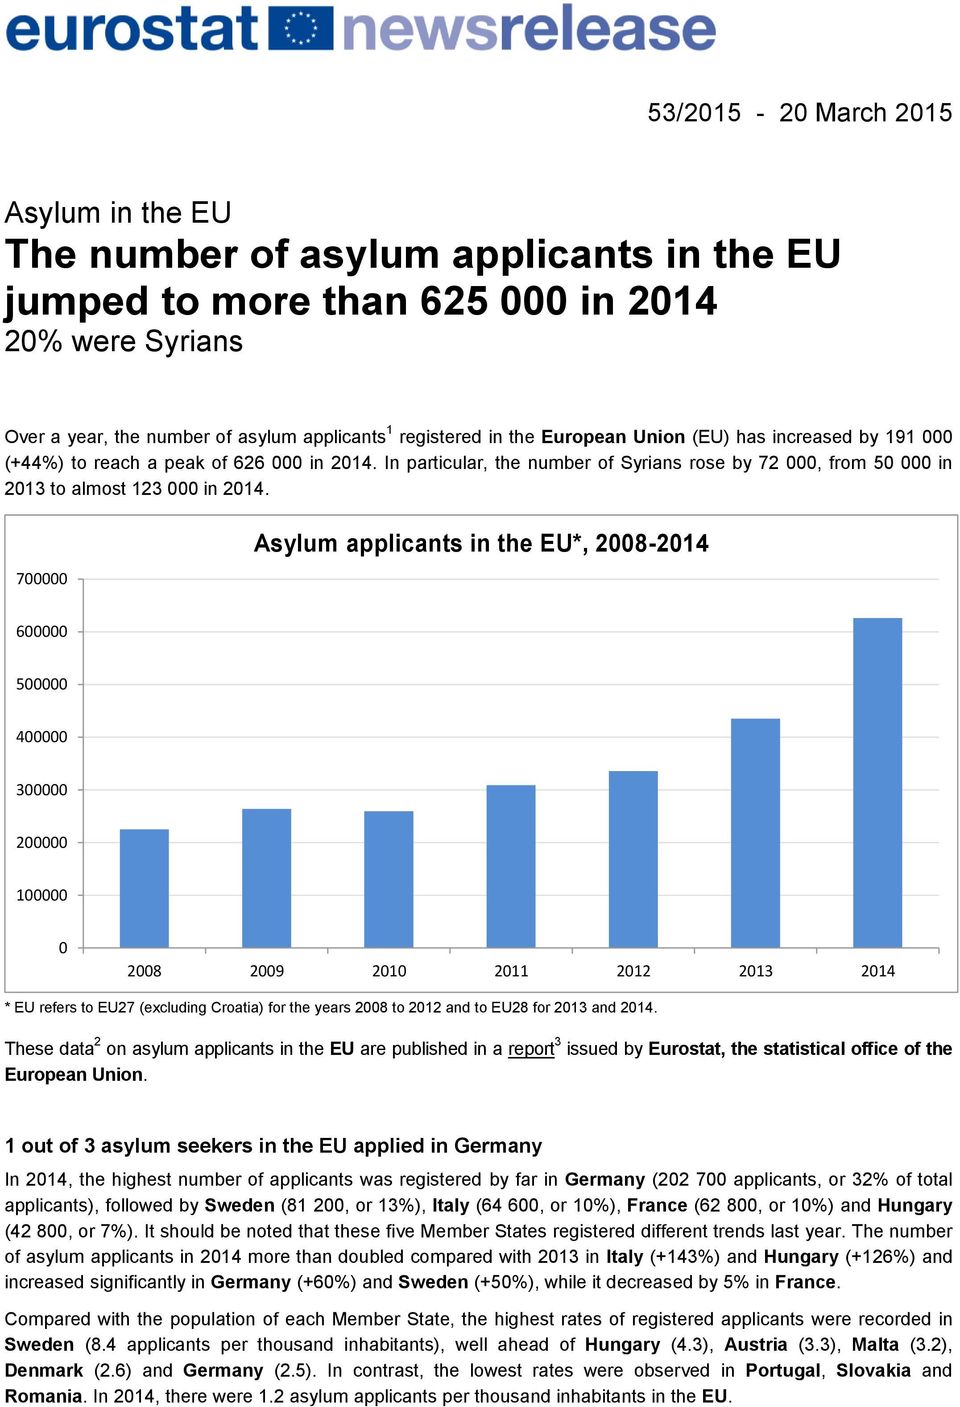 700000 Asylum applicants in the EU*, 2008-2014 600000 500000 400000 300000 200000 100000 0 2008 2009 2010 2011 2012 2013 2014 * EU refers to EU27 (excluding Croatia) for the years 2008 to 2012 and to